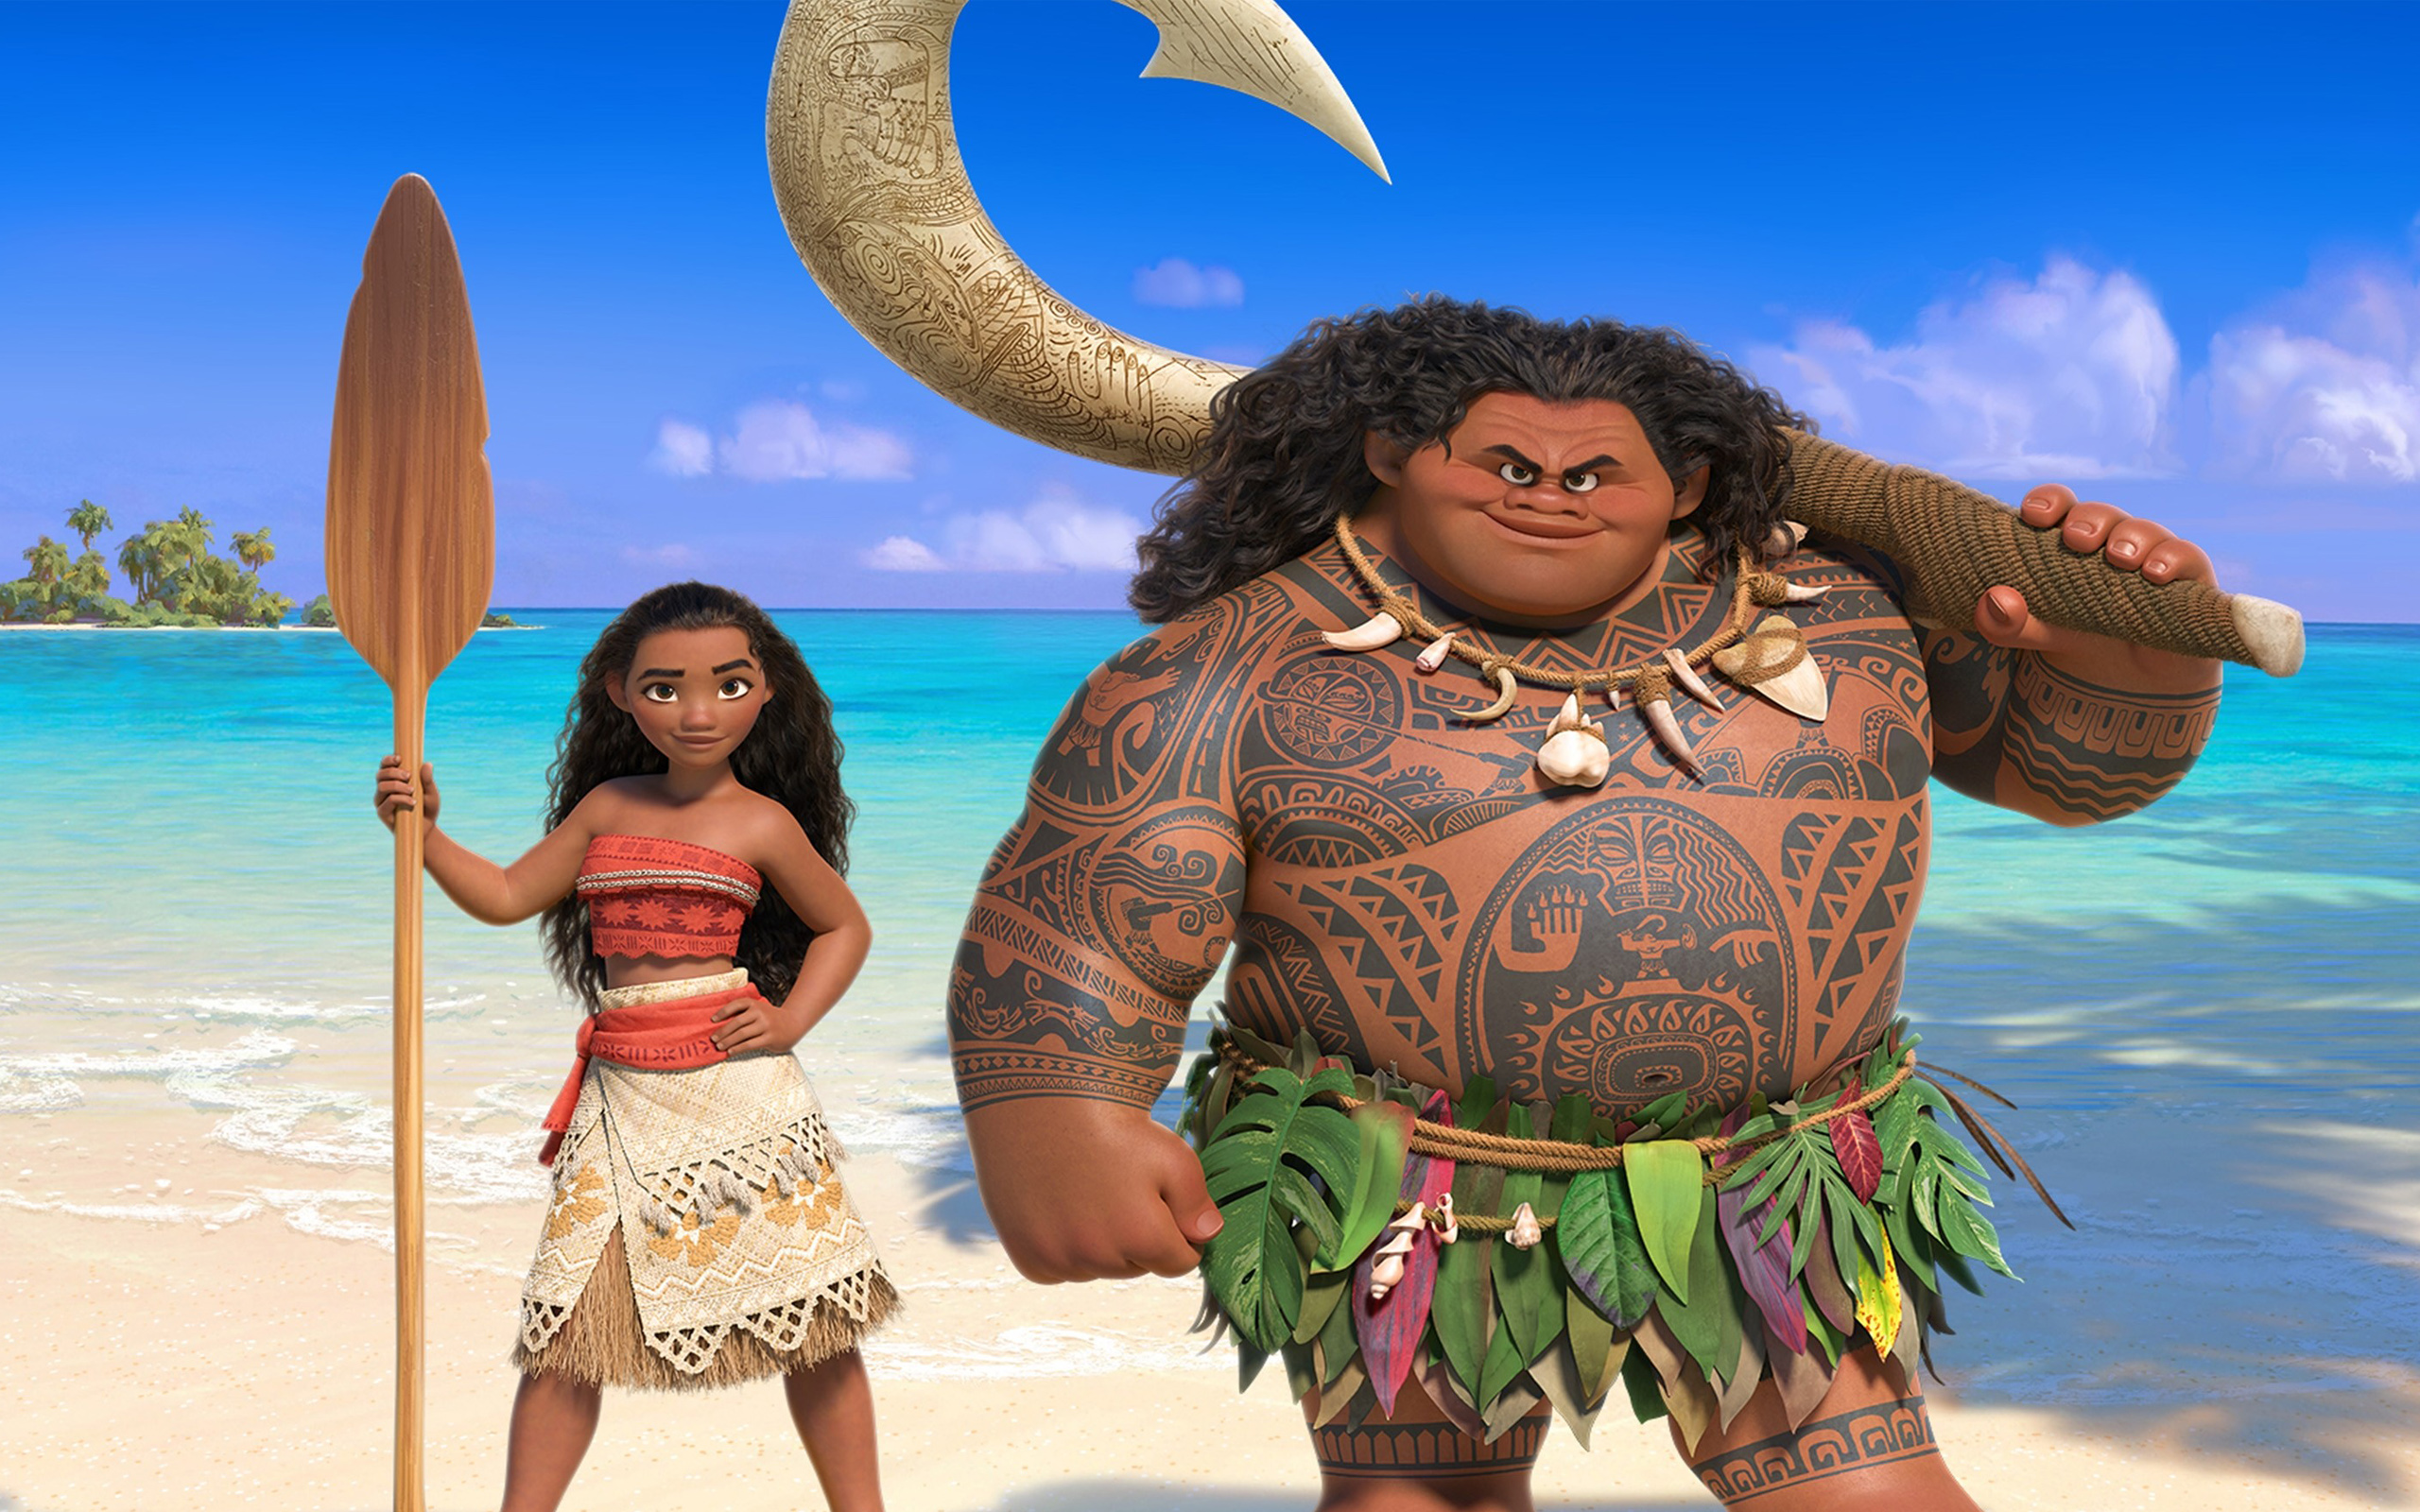 Moana 4K wallpaper for your desktop or mobile screen free and easy to download